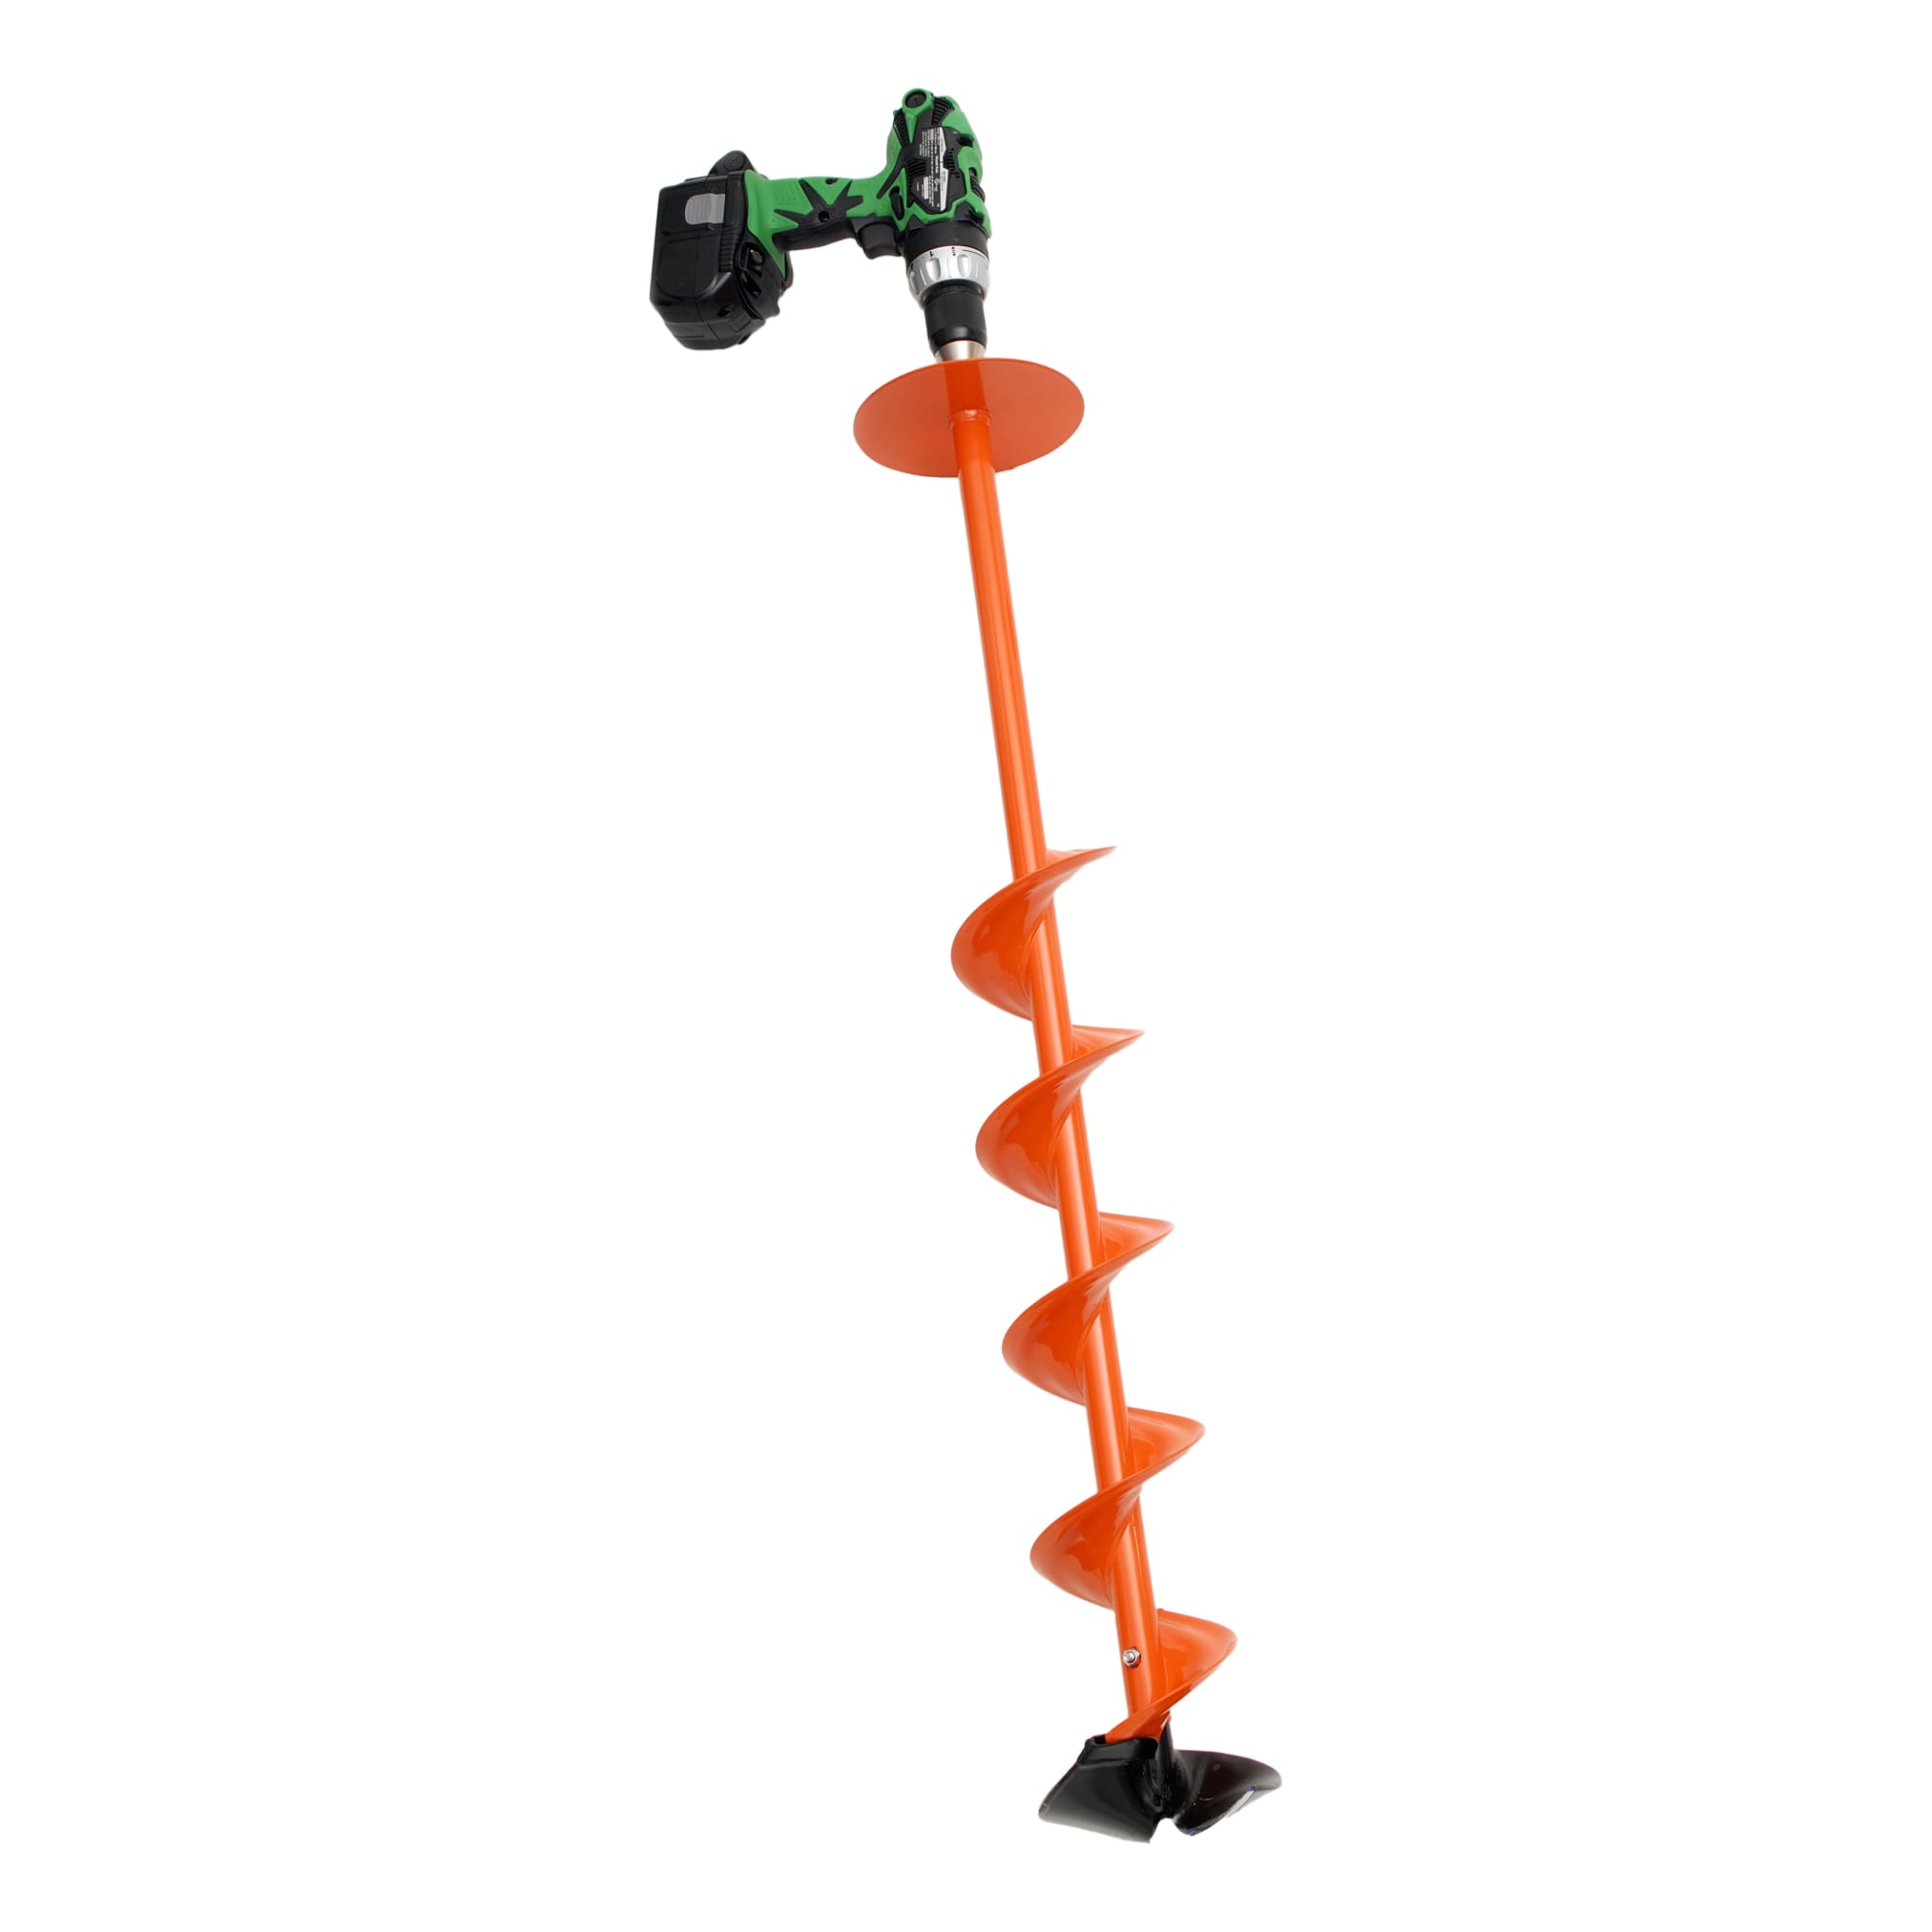 Nils 8" Convertible Hand Auger